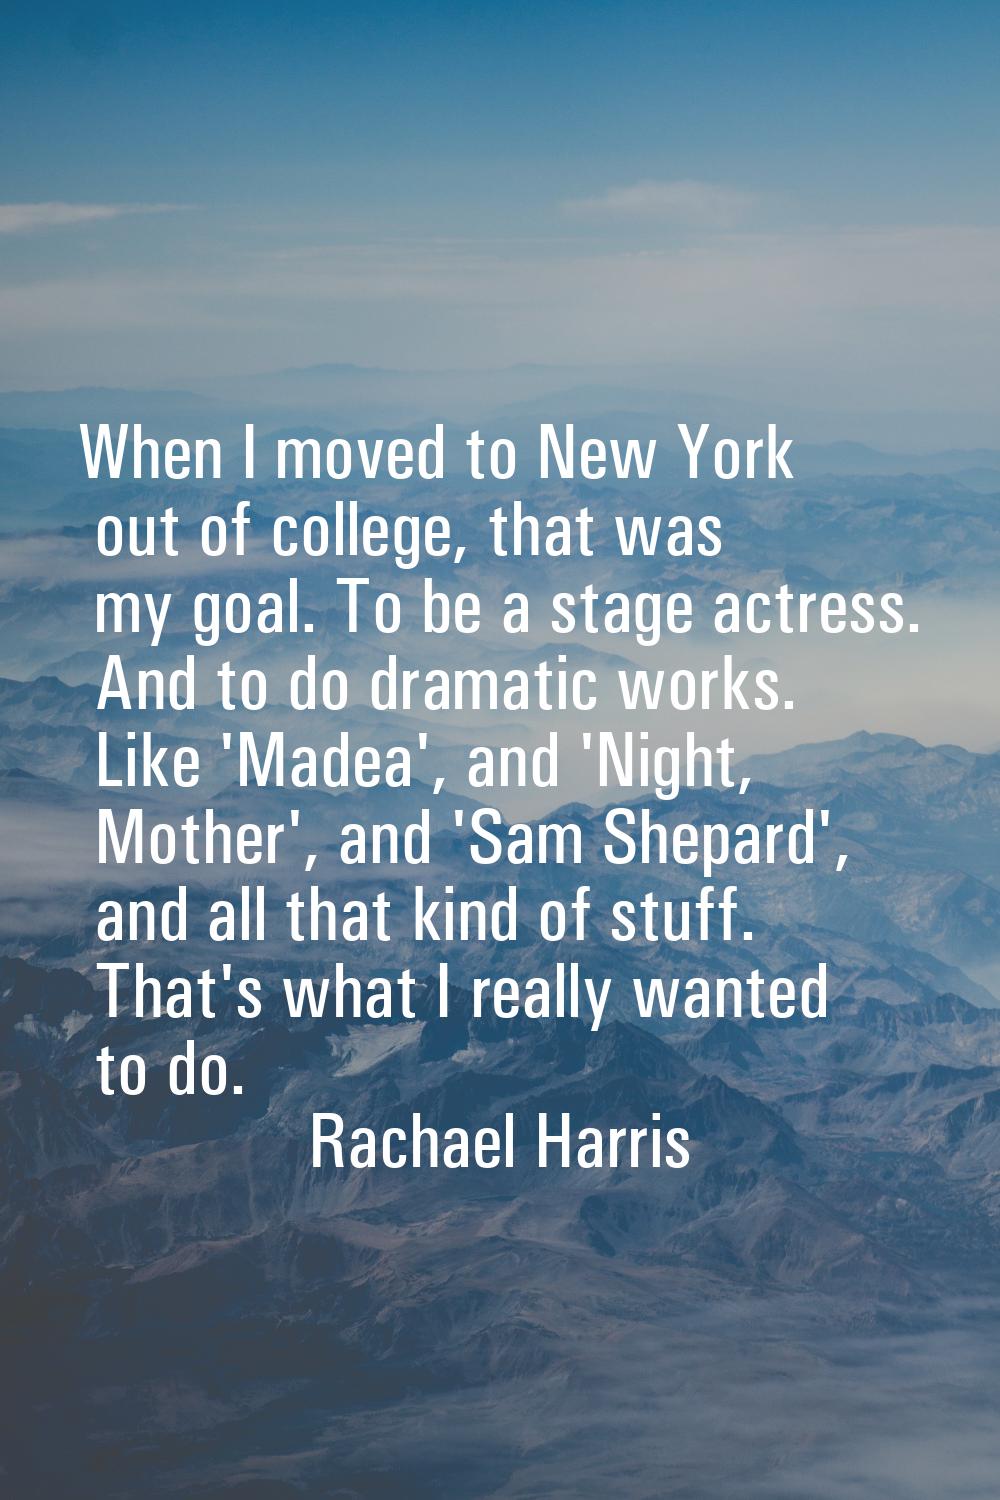 When I moved to New York out of college, that was my goal. To be a stage actress. And to do dramati